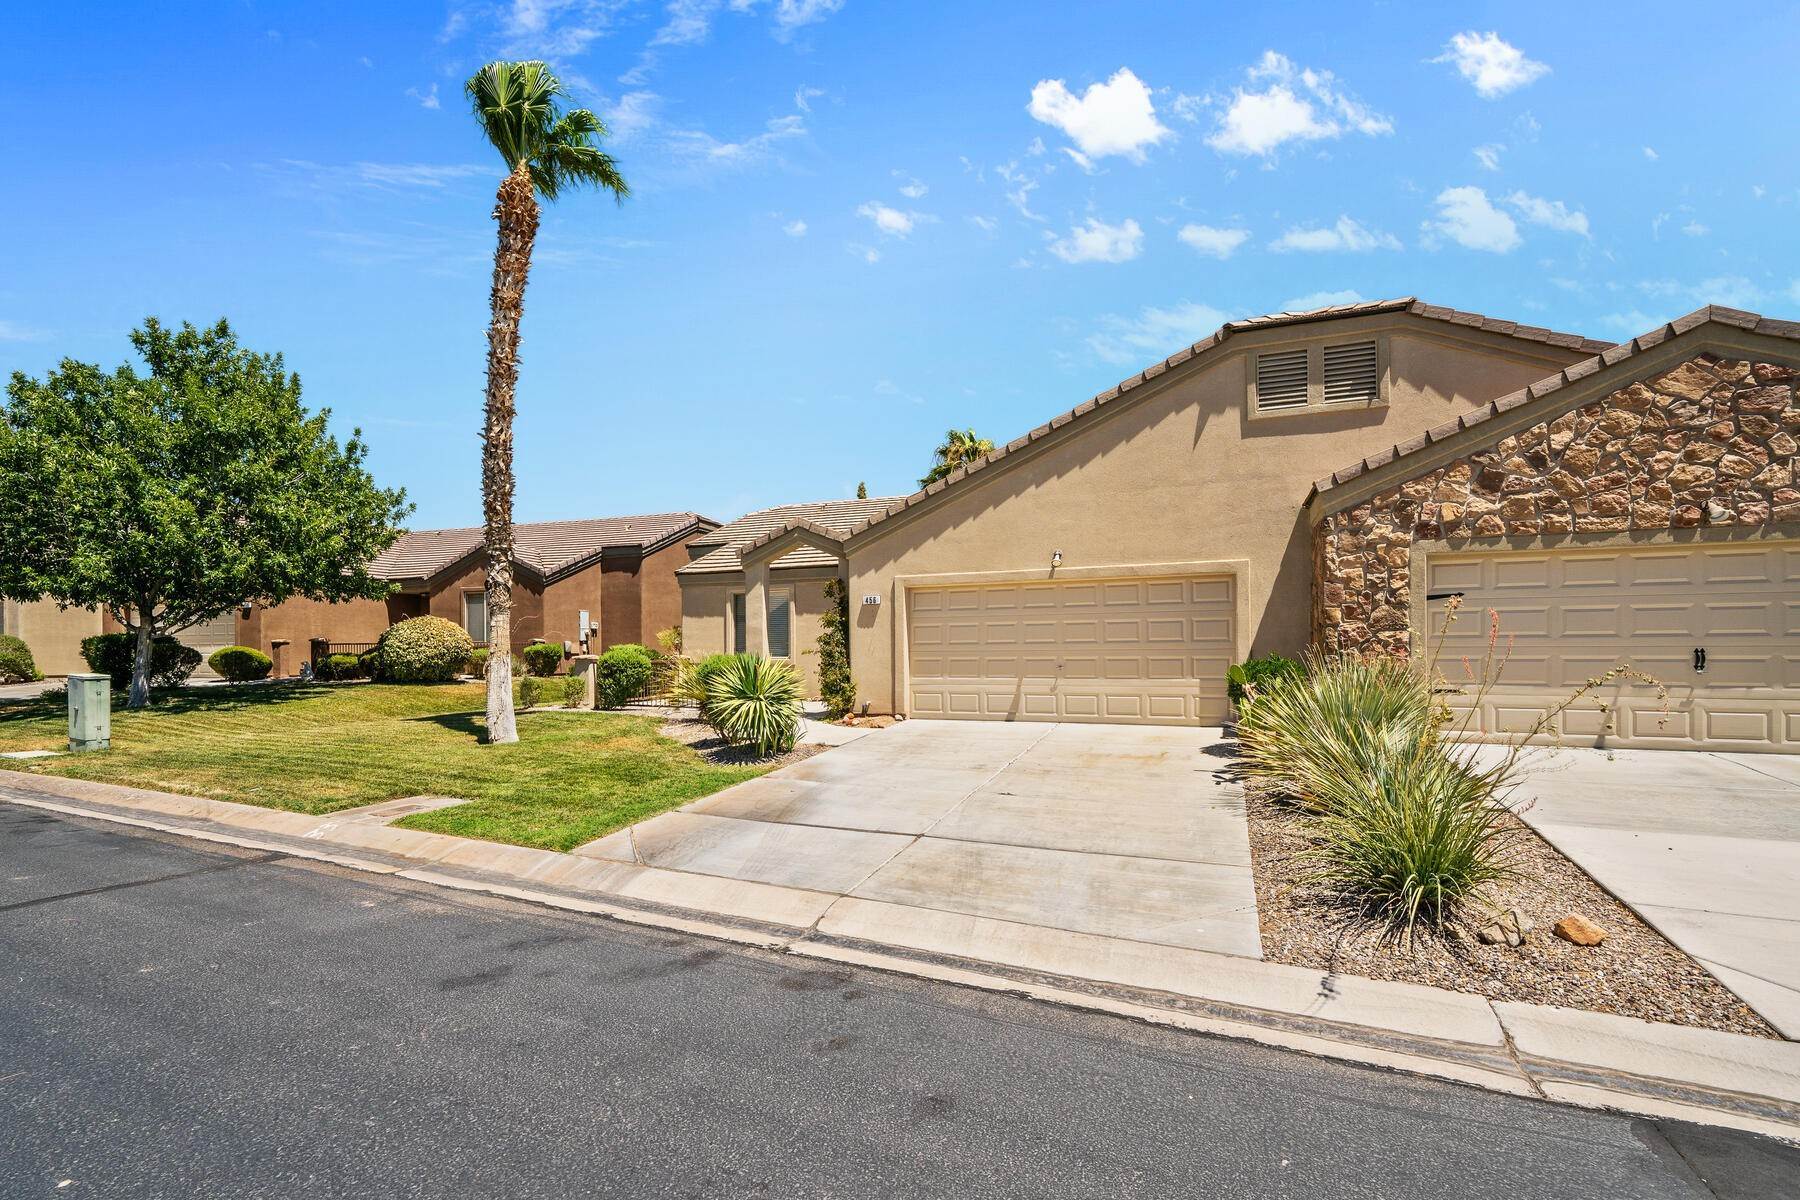 30. Townhouse for Sale at Light, Bright Mesquite Townhome 456 Hagens Alley Mesquite, Nevada 89027 United States